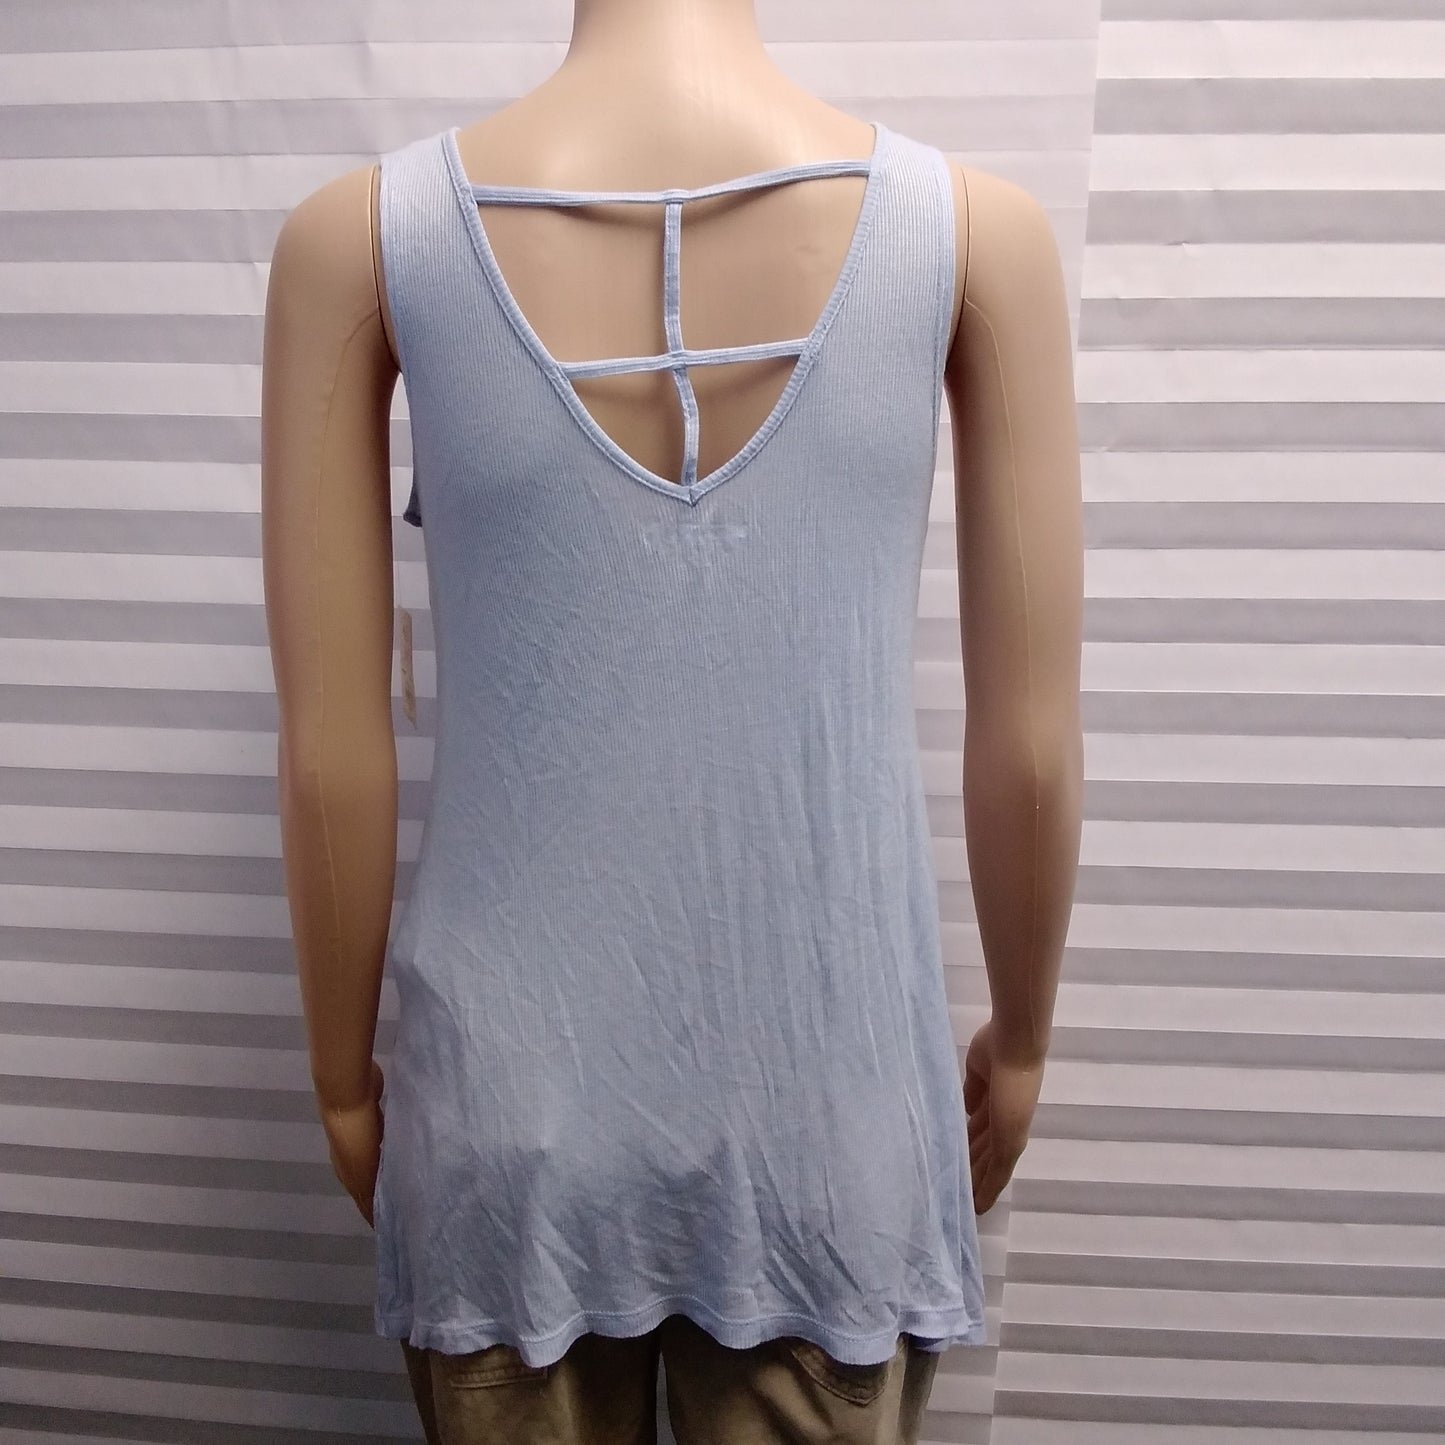 NWT - Mudd Blue Ladder Front Tank Top - Small